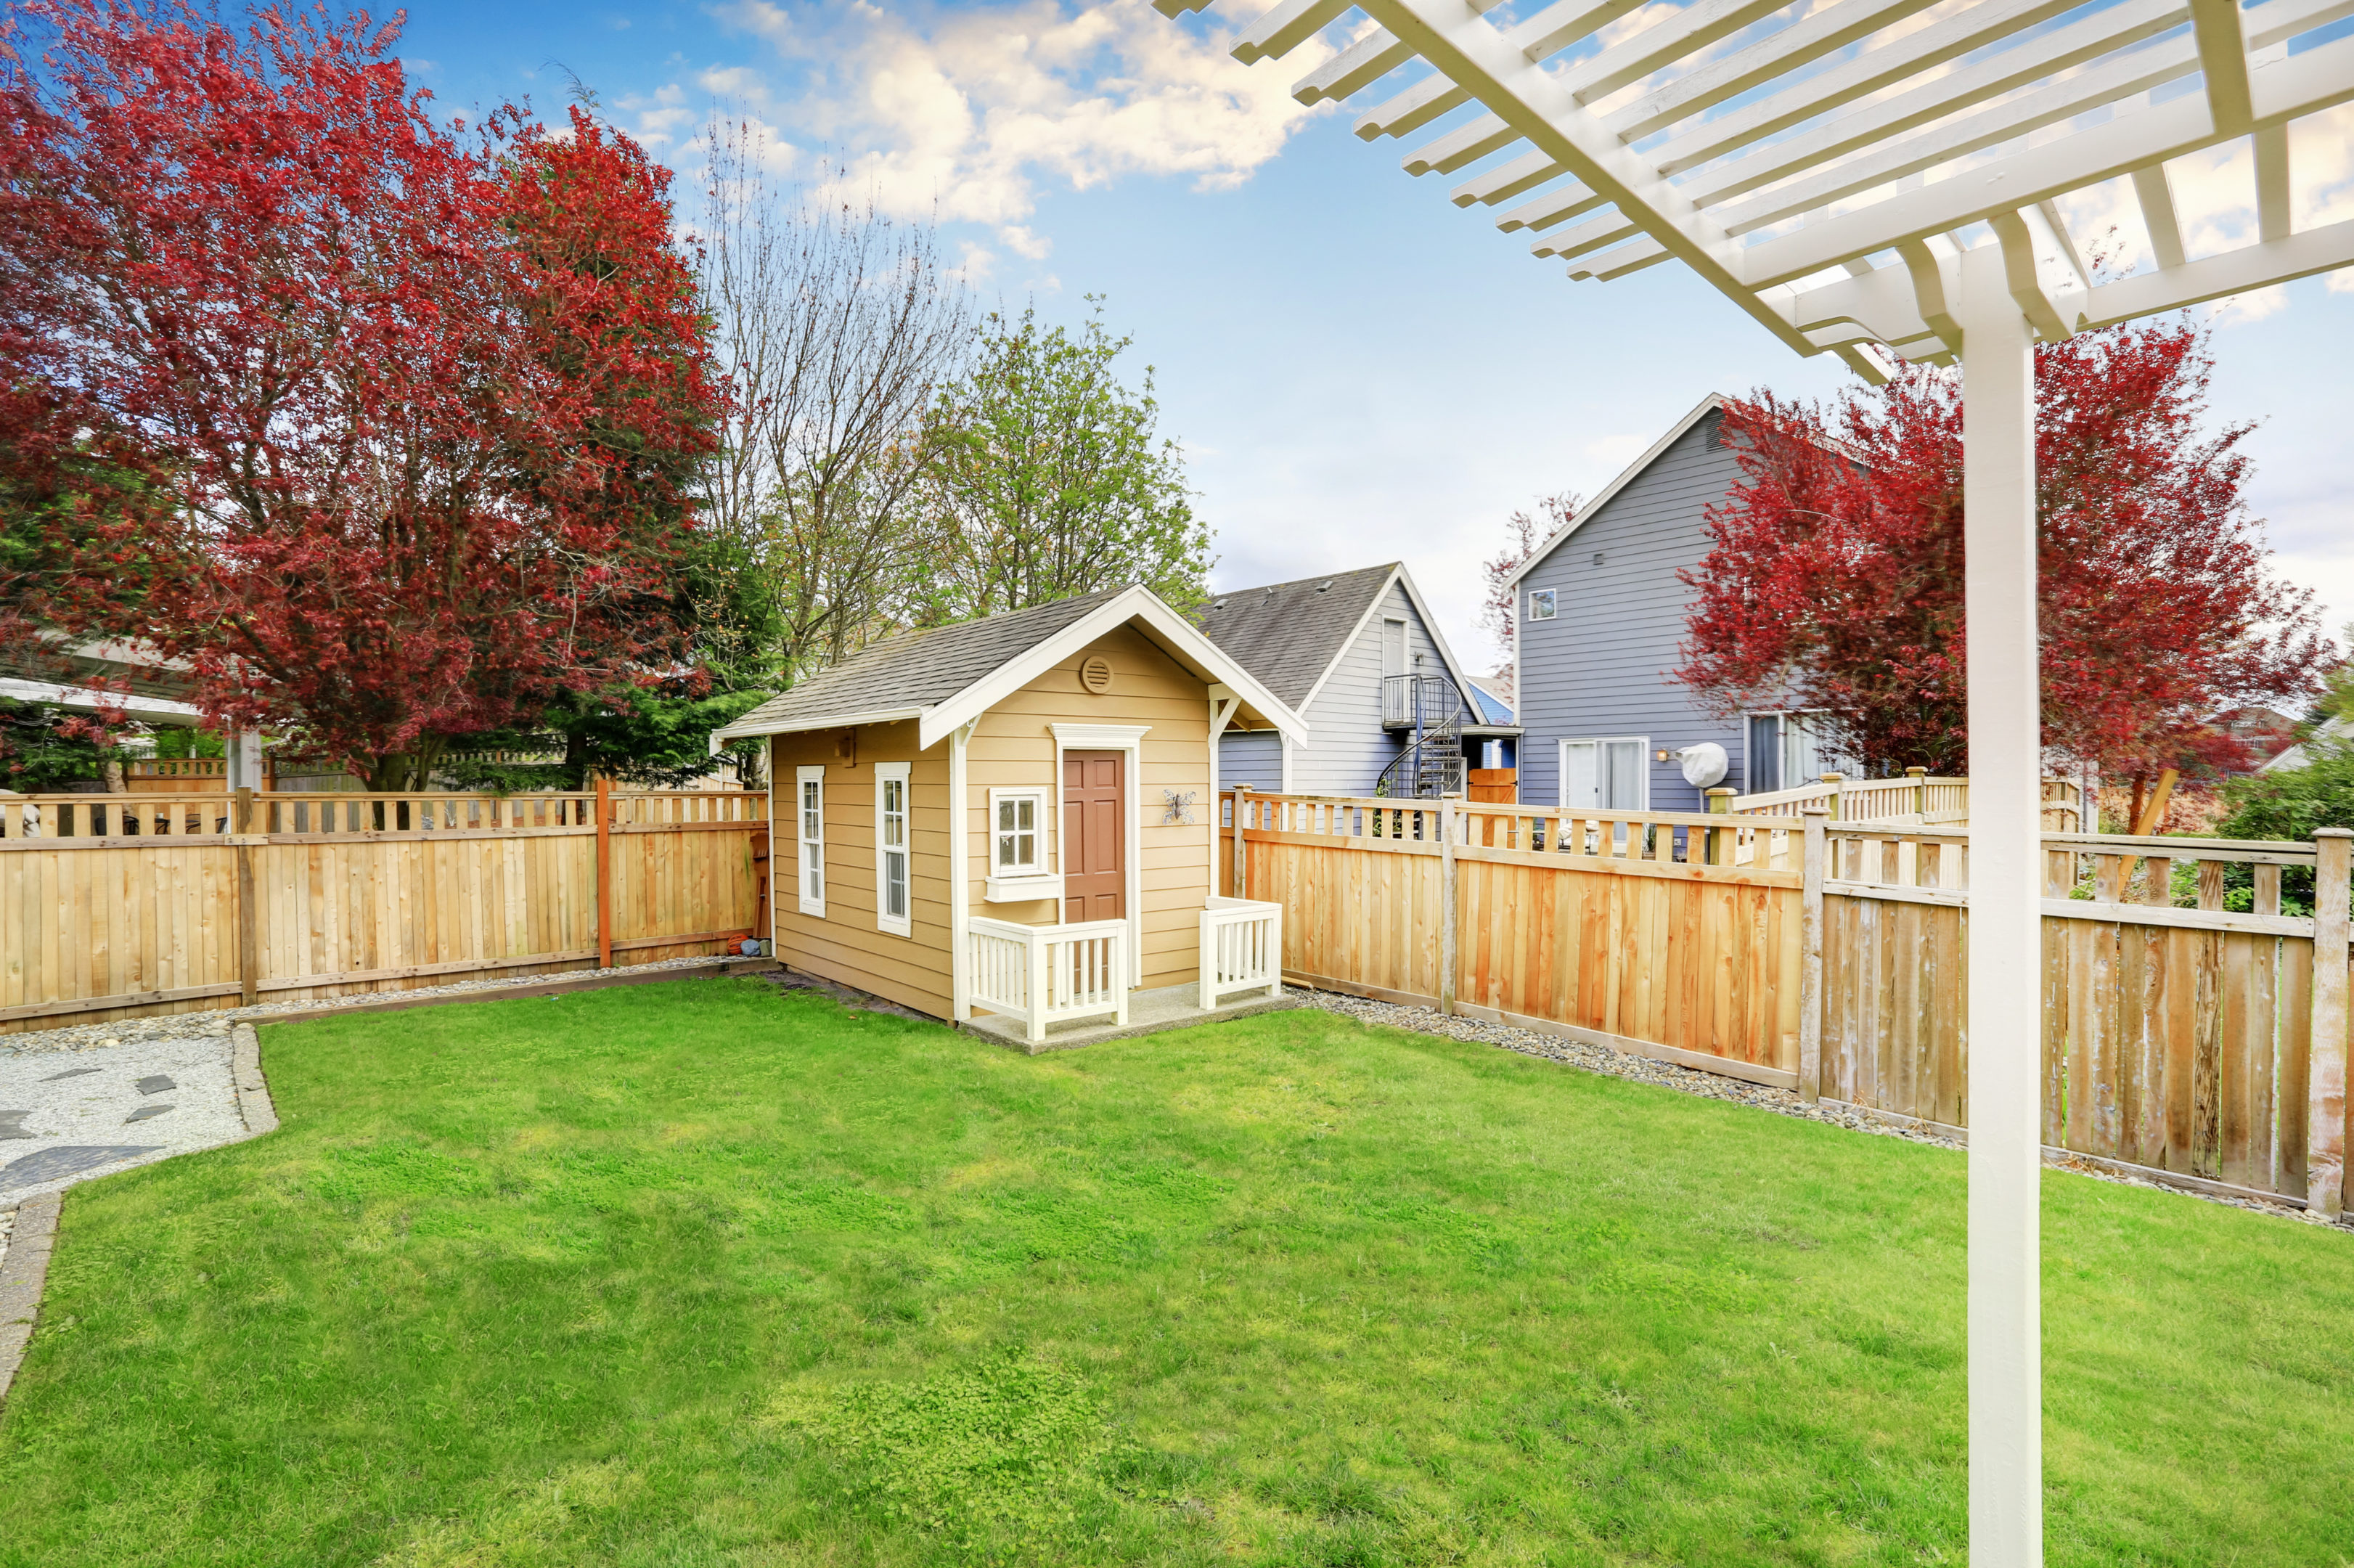 Attractive Storage Sheds for Backyards | Hittle Landscaping